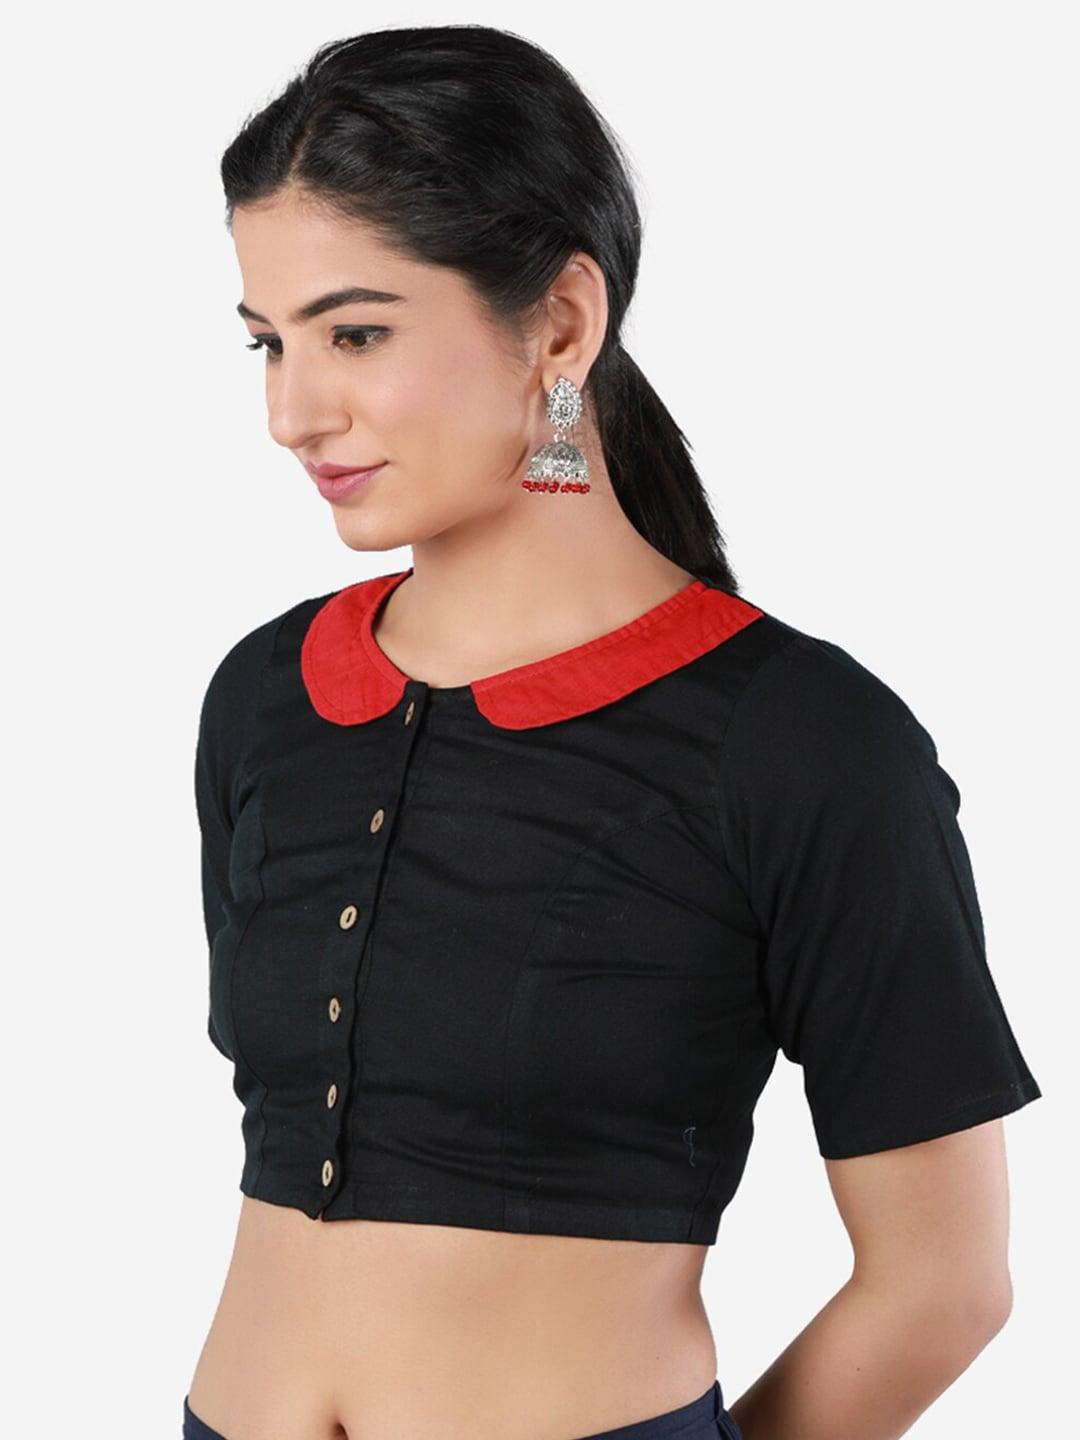 llajja-women-black-&-red-solid-pure-cotton-readymade-saree-blouse